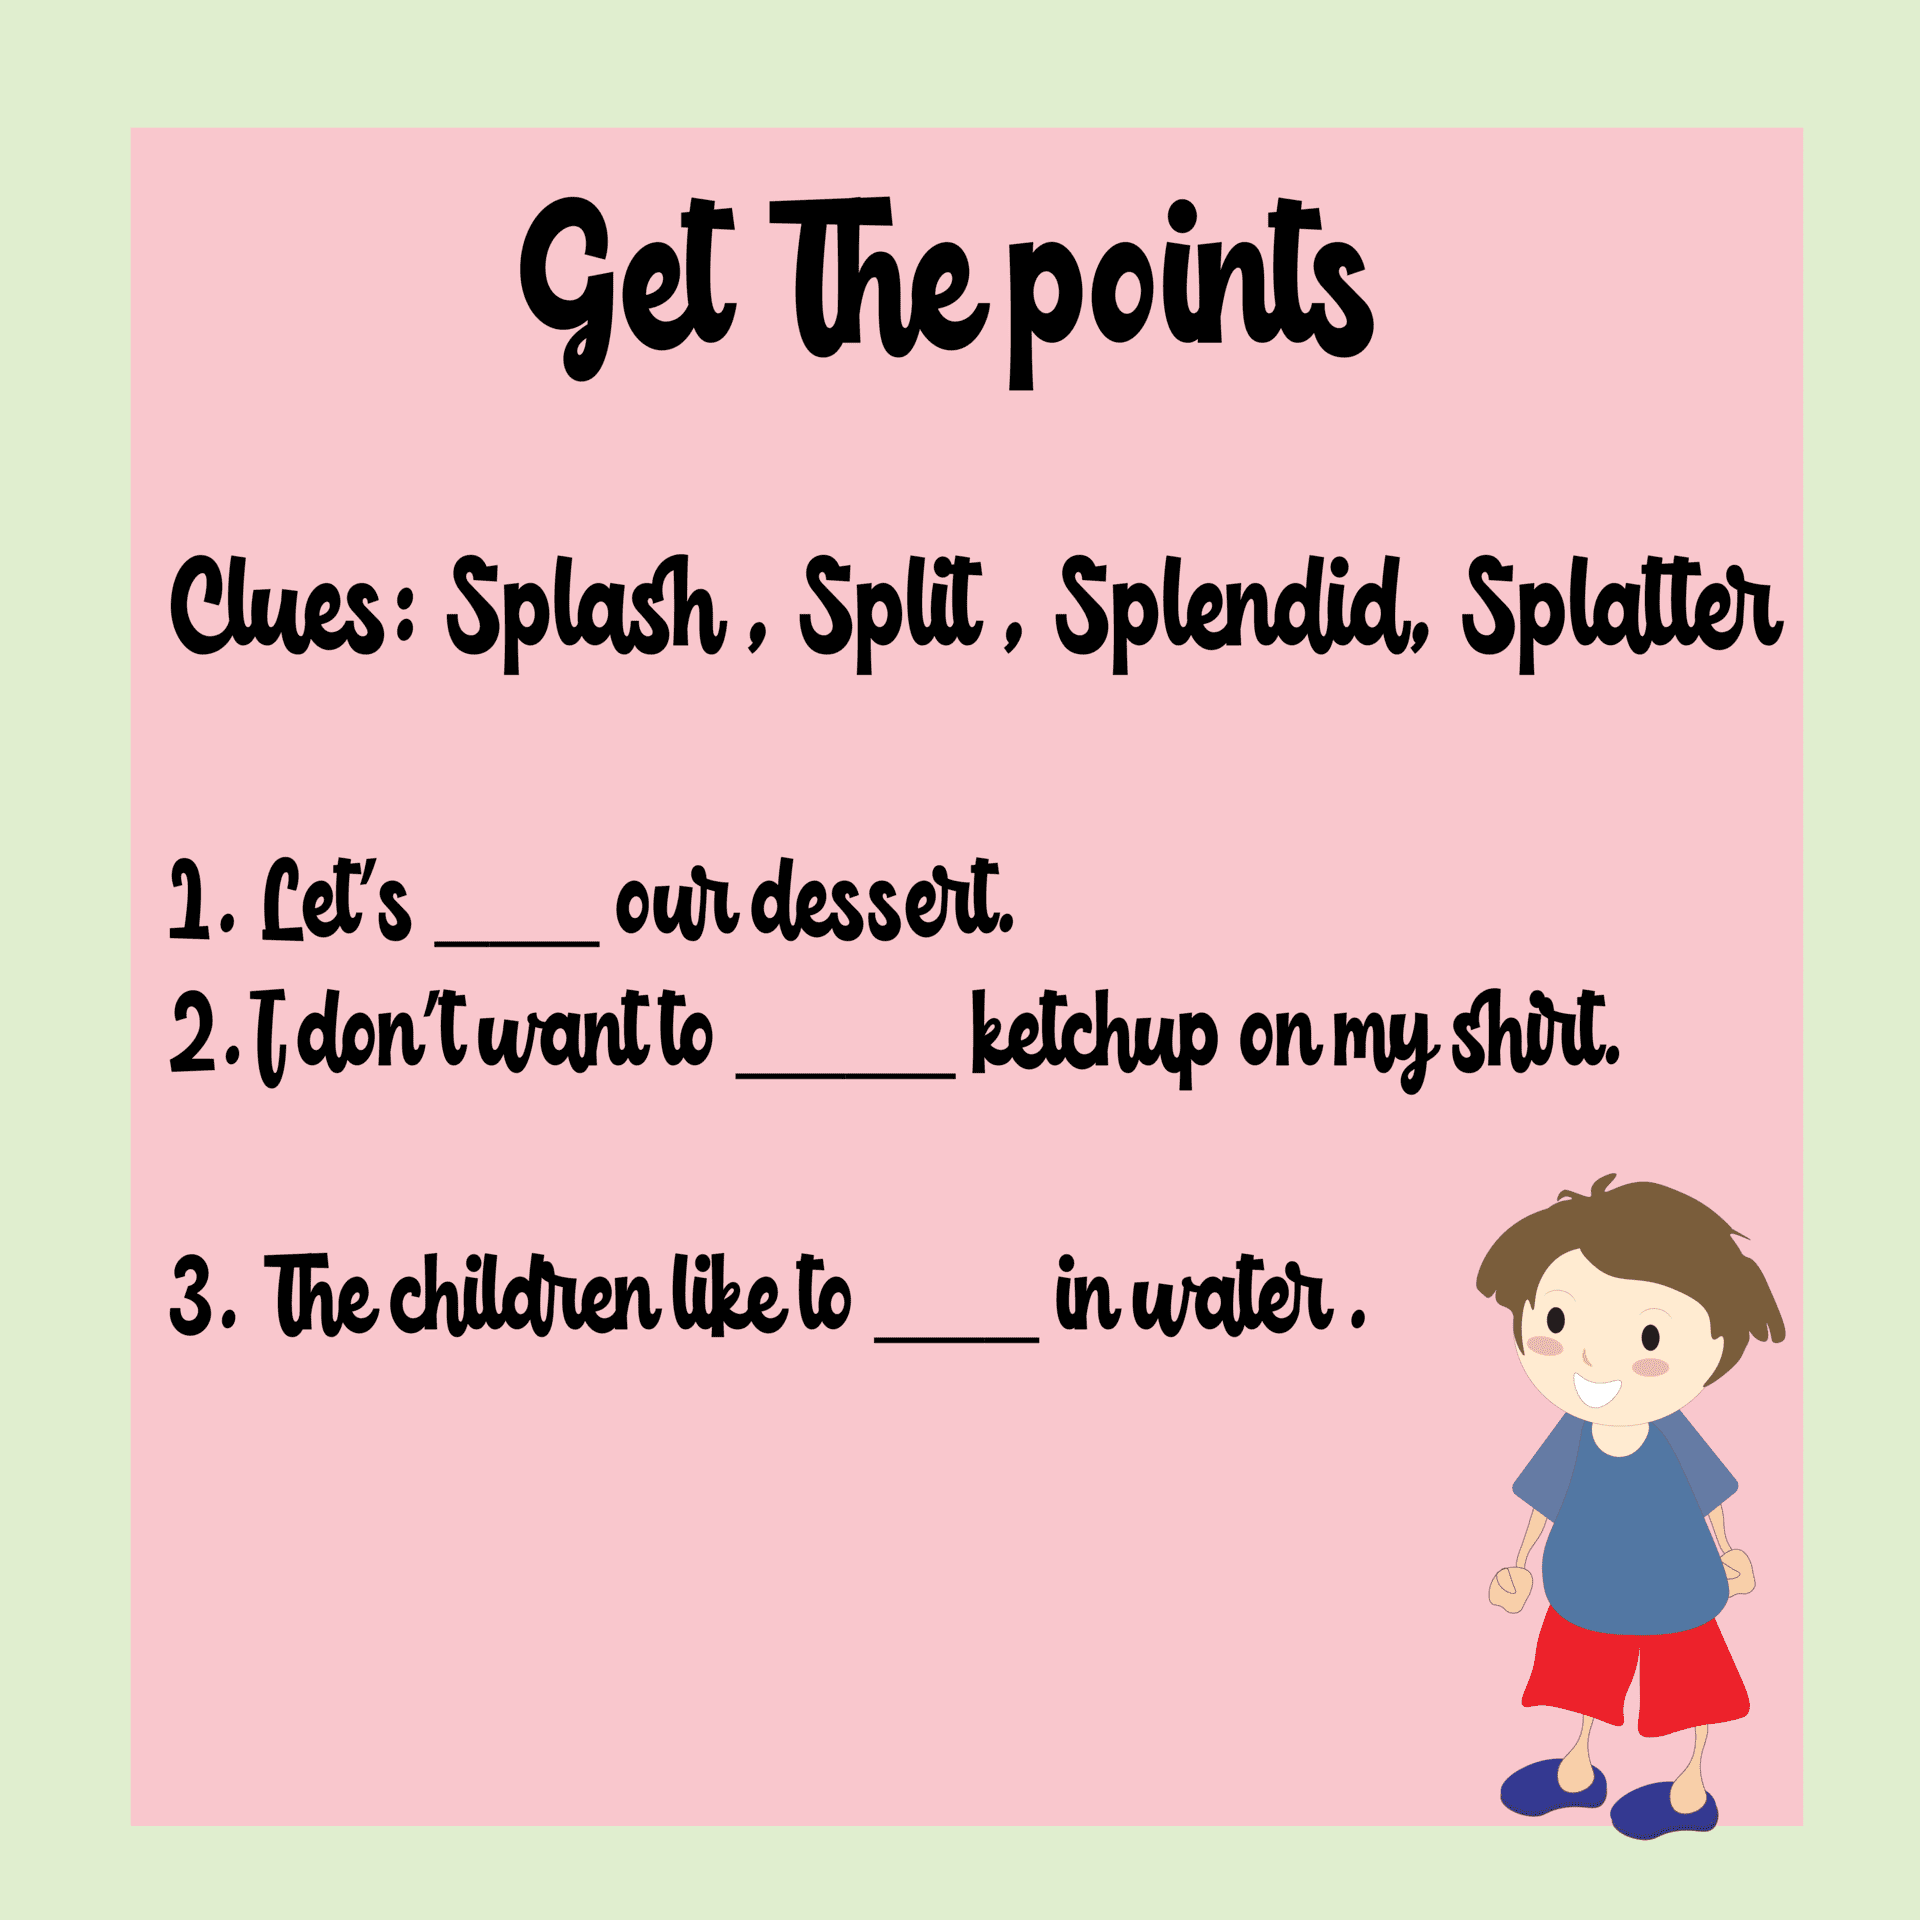 Get the points Using Spl Words!